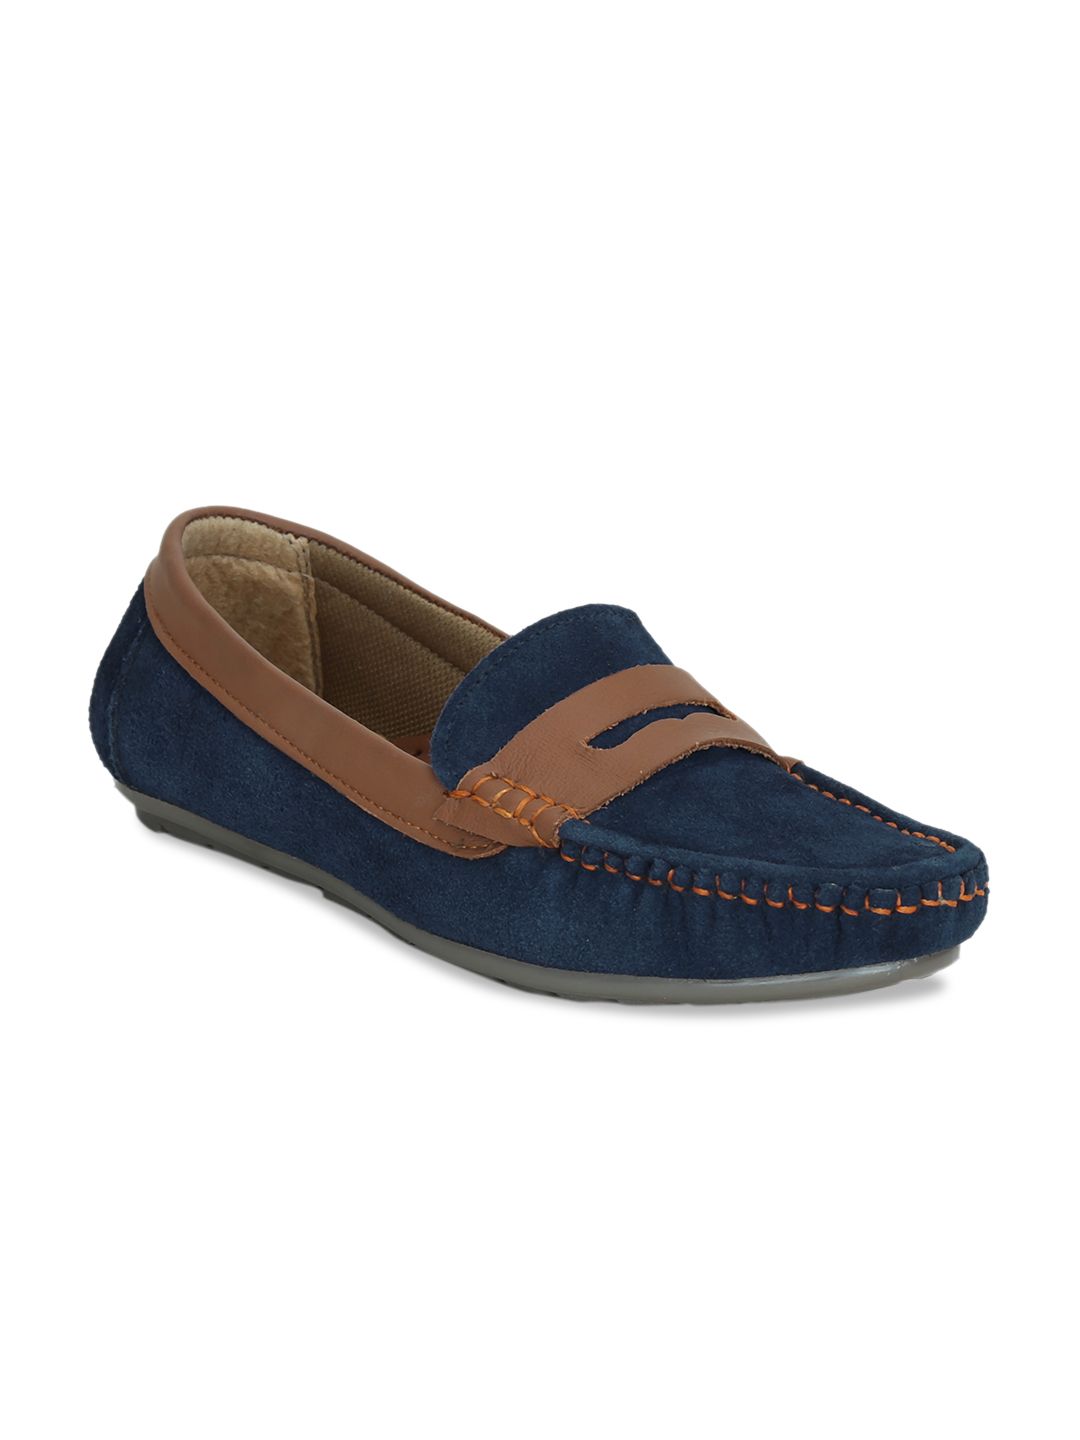 Get Glamr Women Blue & Brown Suede Loafers Price in India